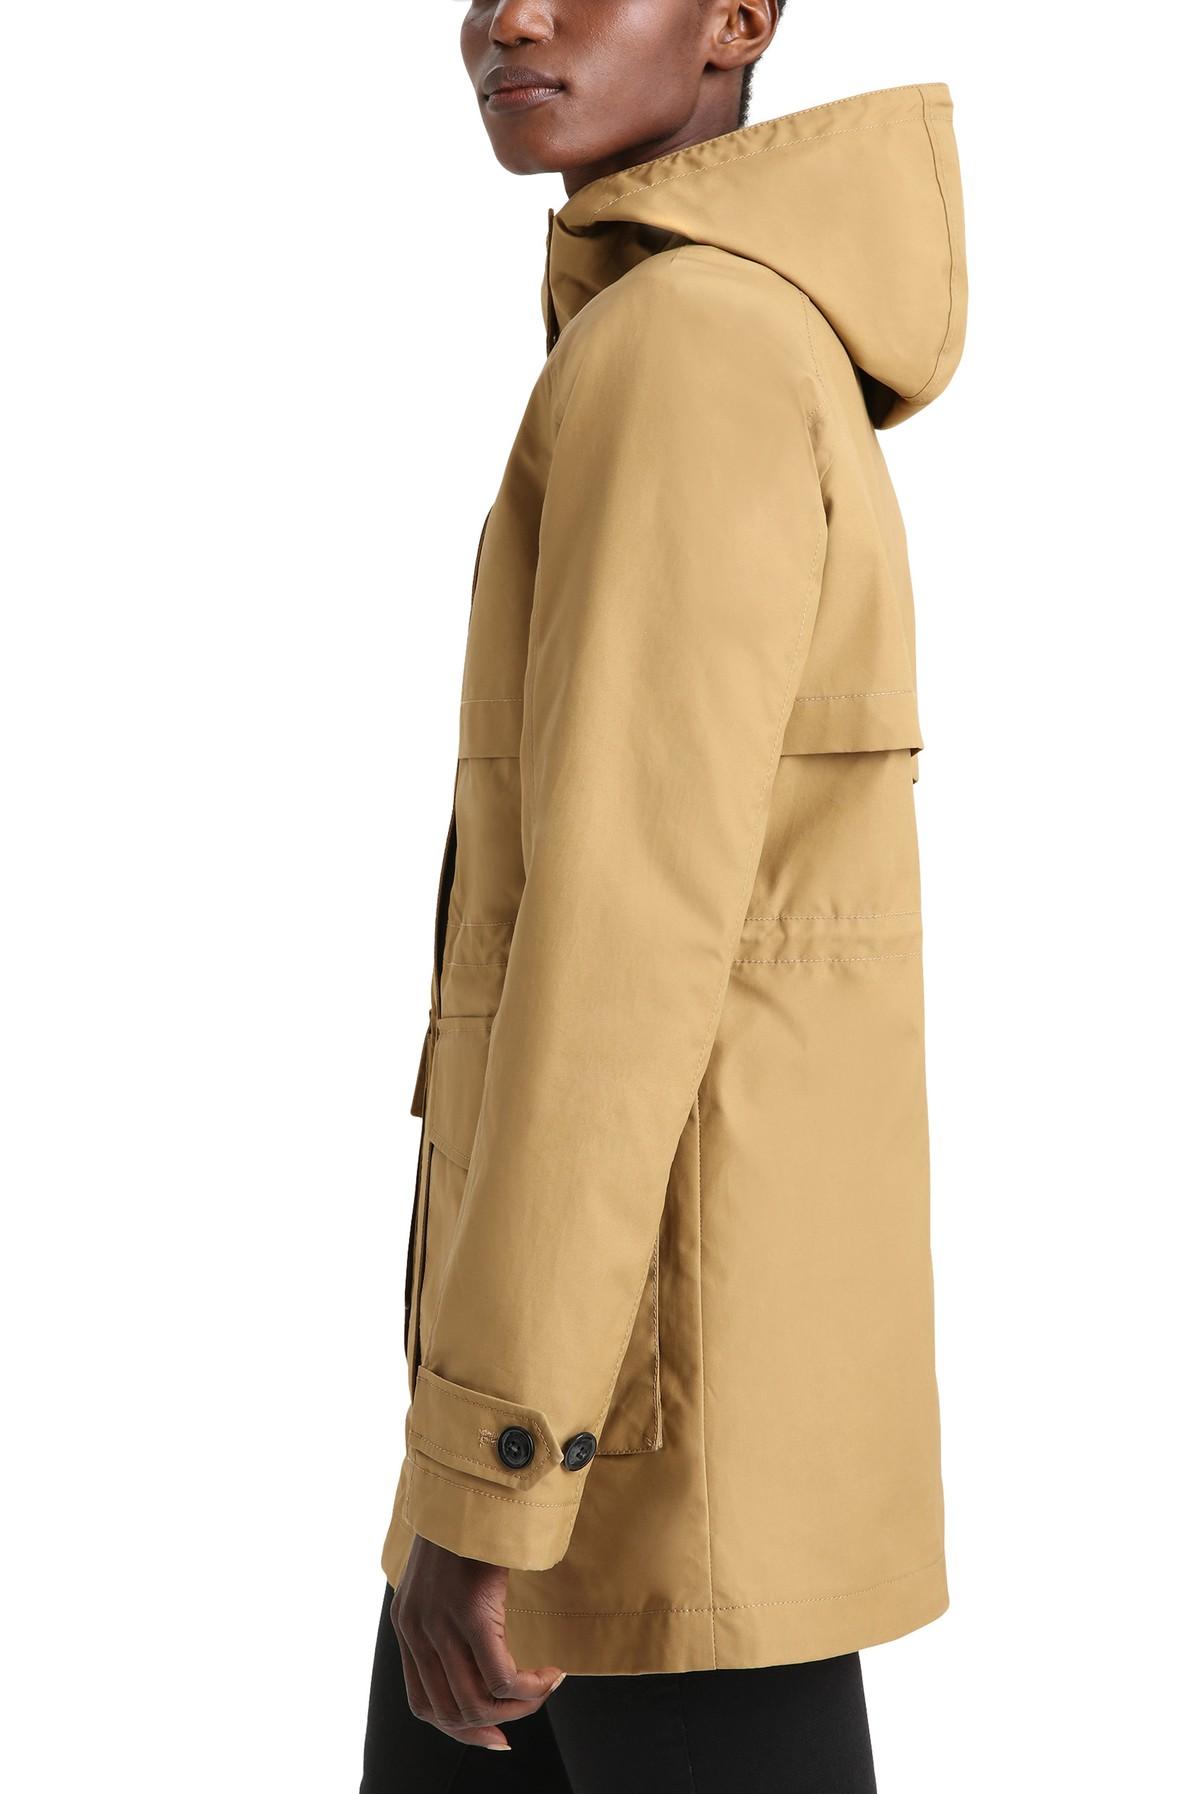 Woolrich Conway Waxed Cotton 2in1 Parka in Natural | Lyst